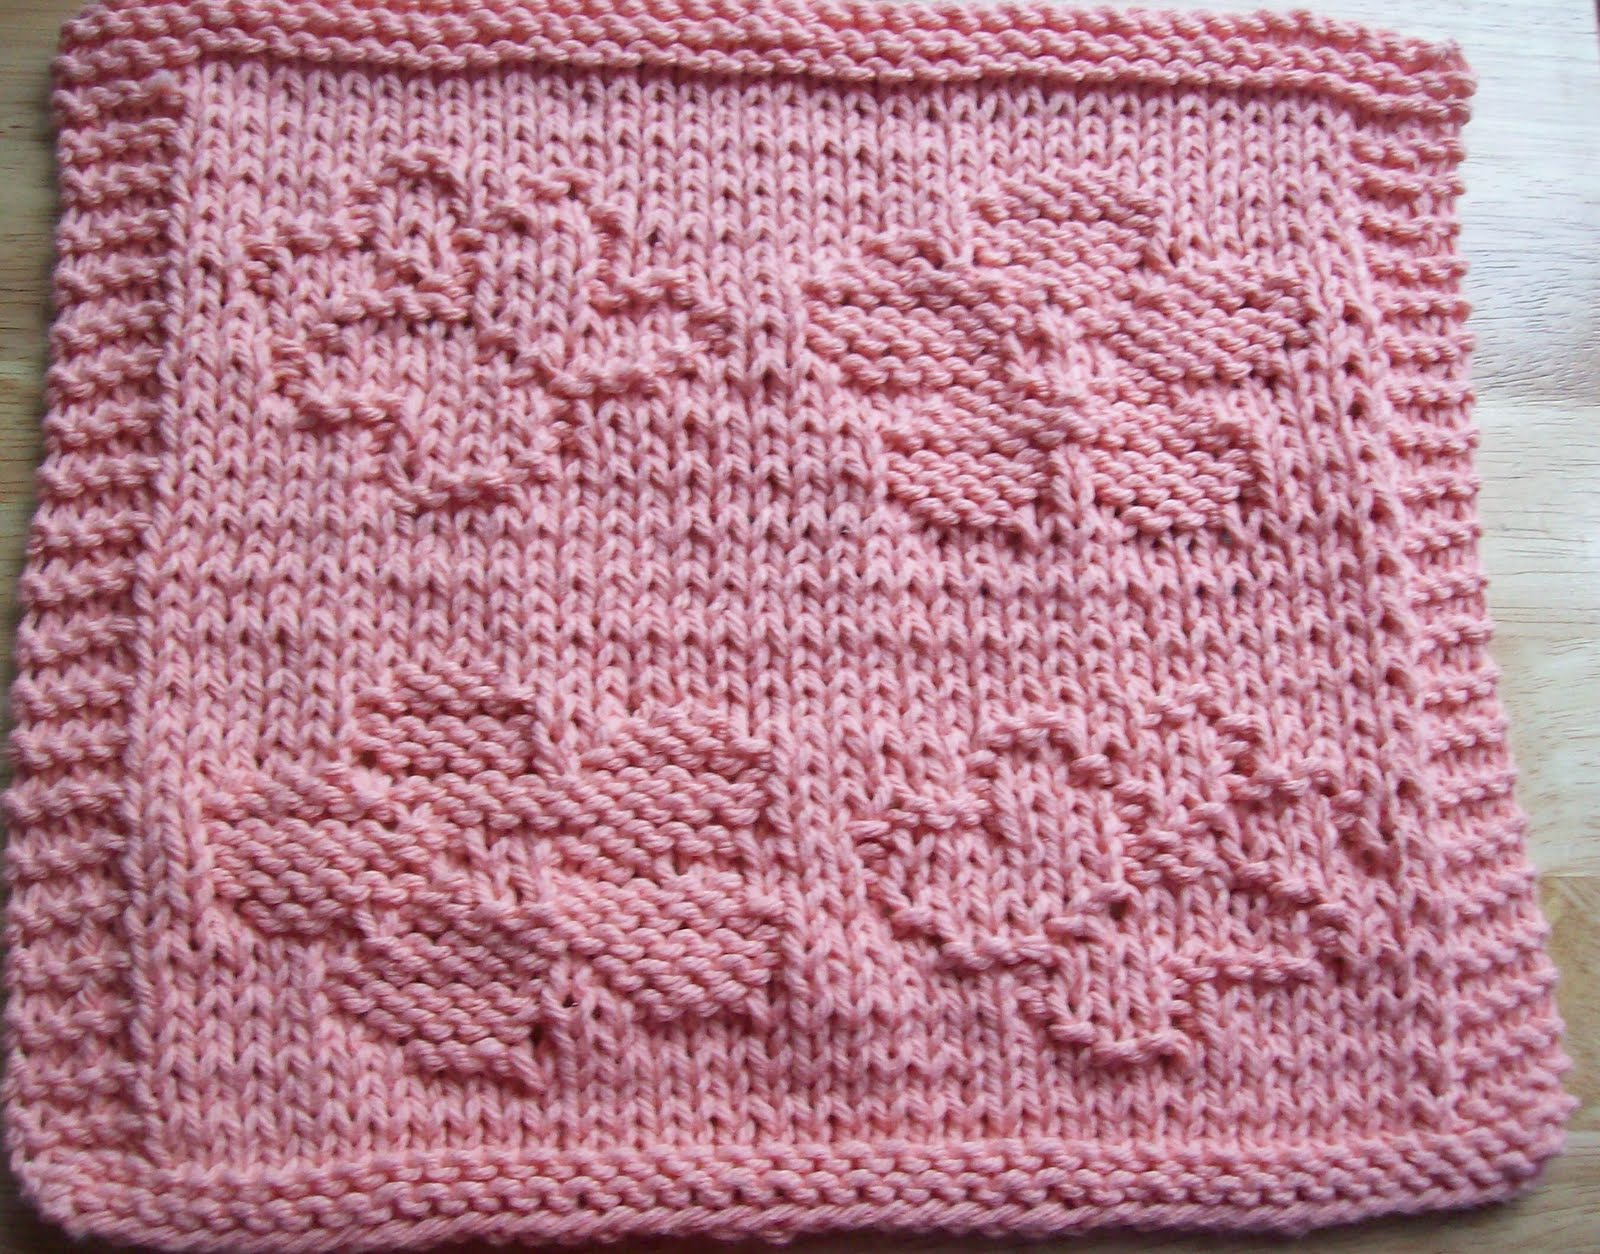 Knitted Butterfly Dishcloth Pattern Digknitty Designs Butterflies And Flowers Knit Dishcloth Pattern